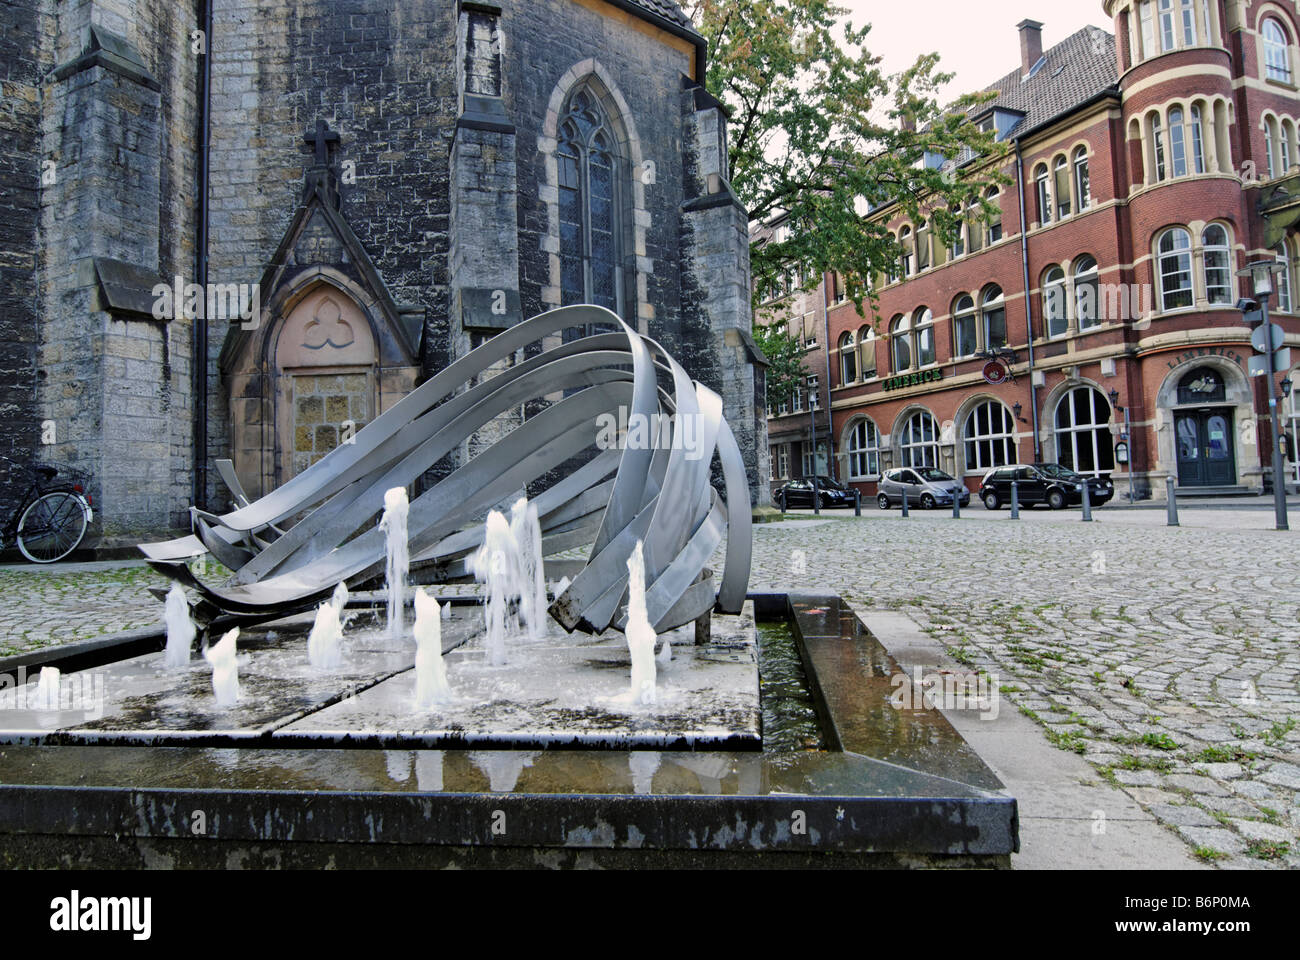 City fountain in front of the old church building Bielefeld Germany Stock Photo